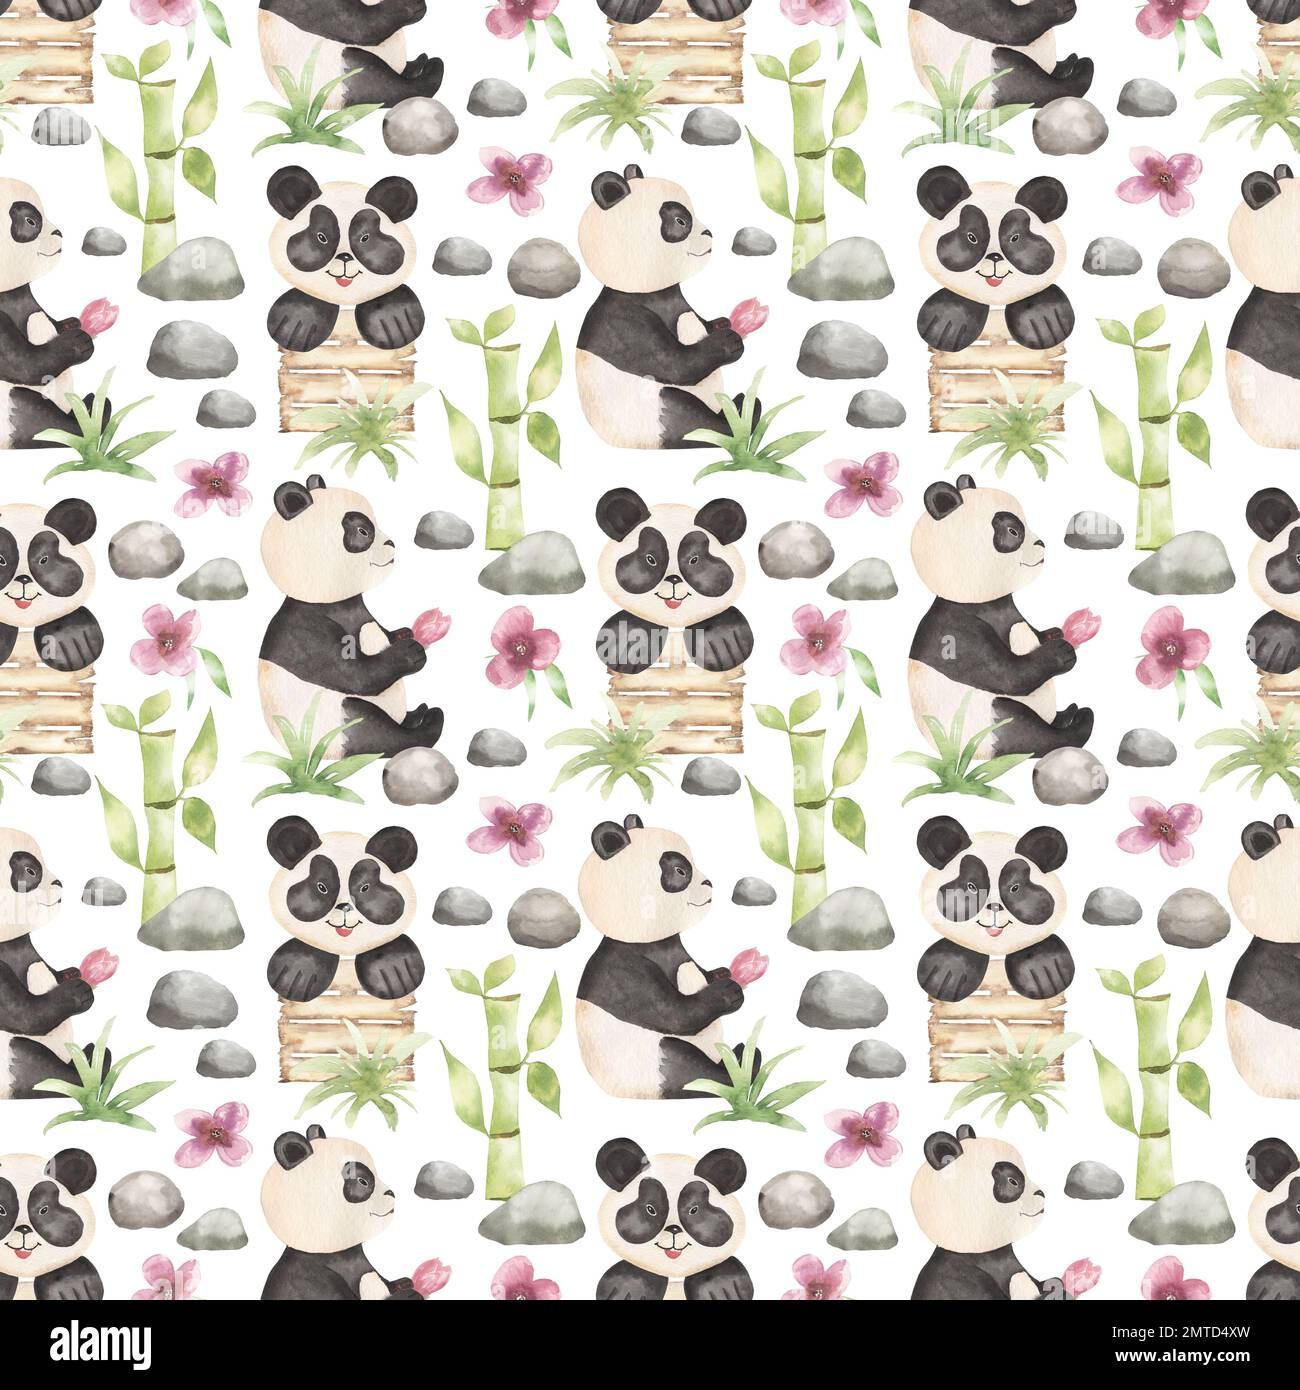 Watercolor cute panda with florals illustration isolated on white background. Seamless pattern of black and white panda animal, stone, green bamboo le Stock Photo